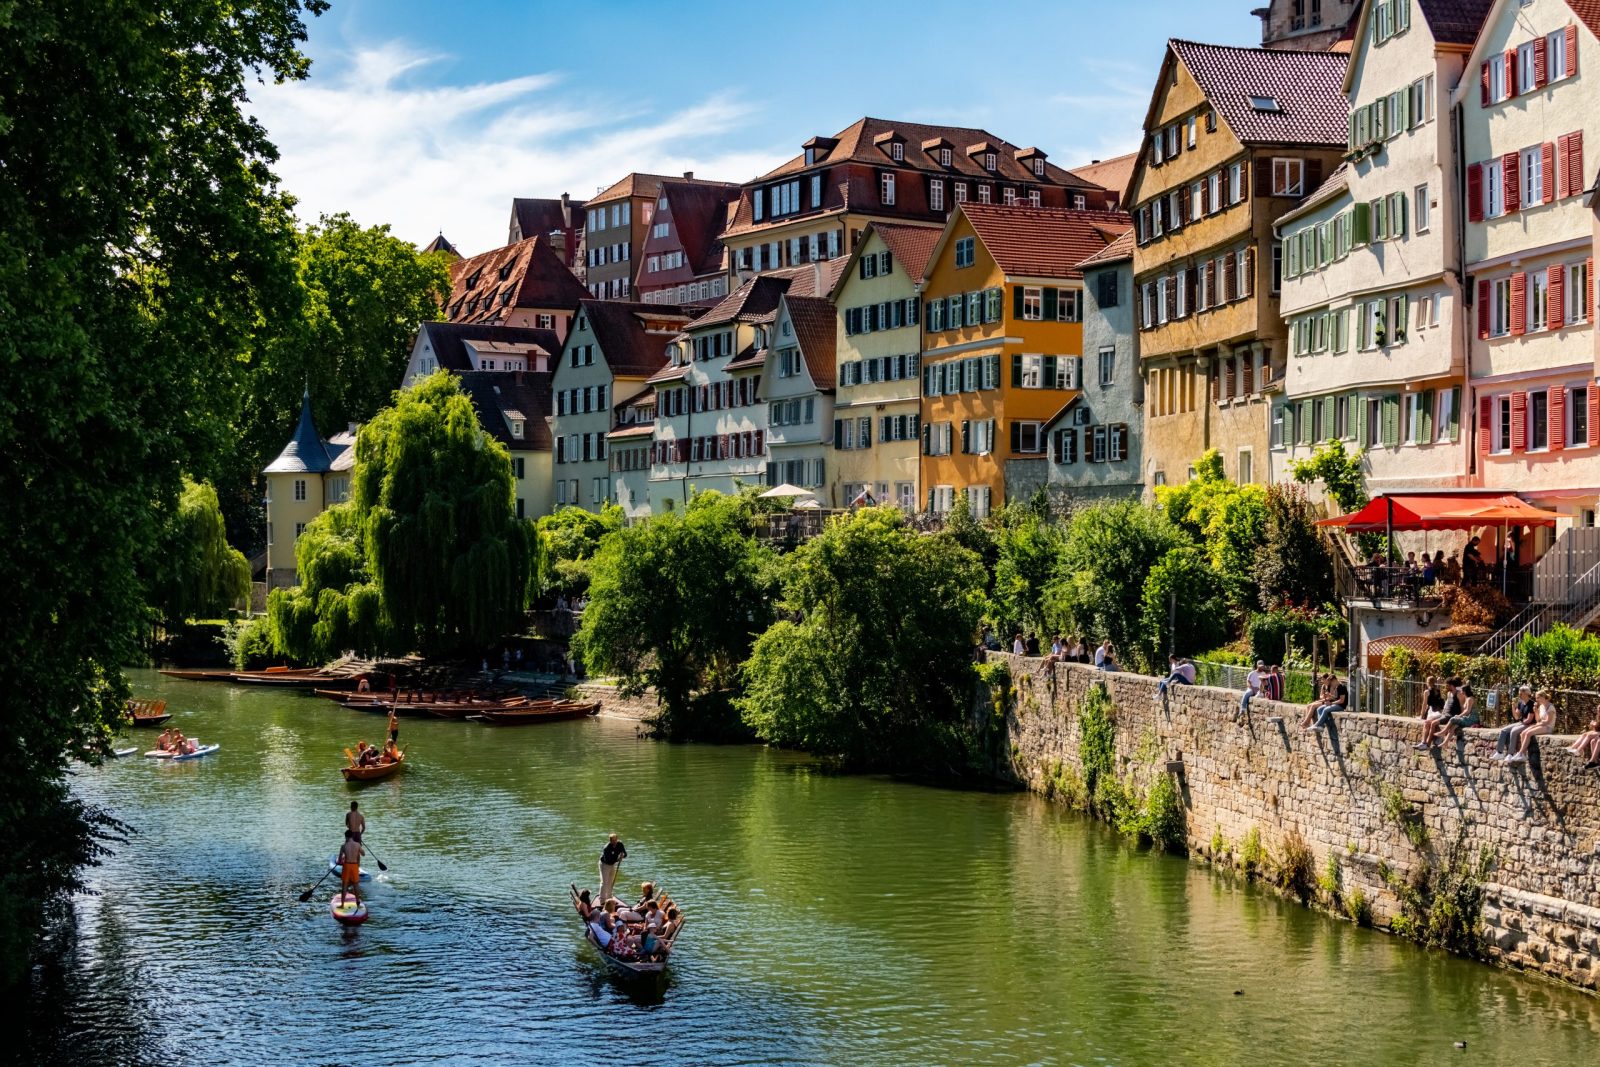 Tubingen town in Germany with a river canal